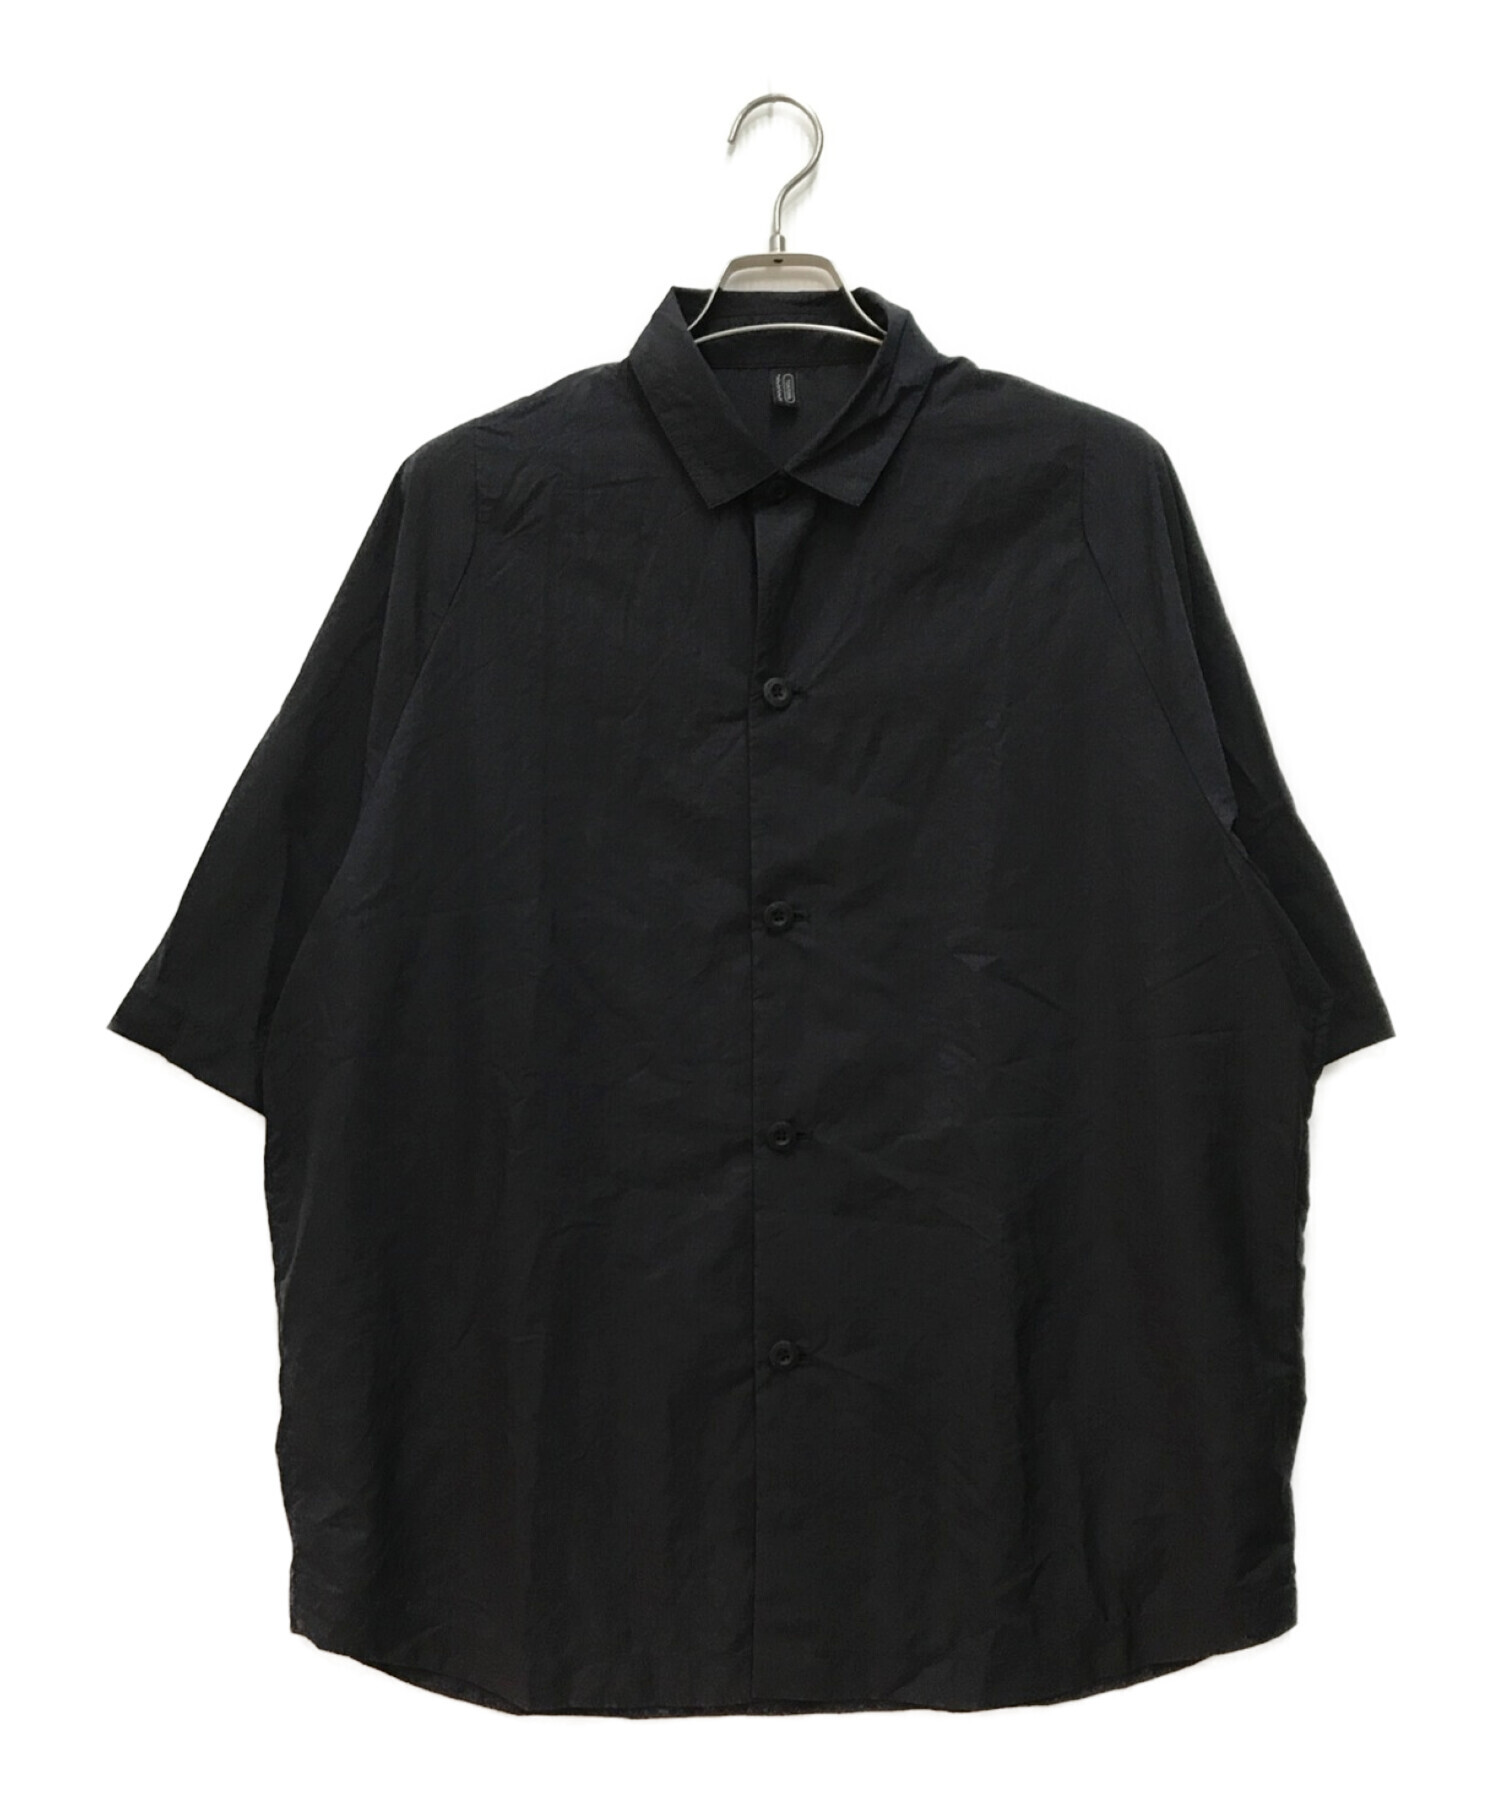 CARTRIDGE SHIRT S/S hover layer #NAVY